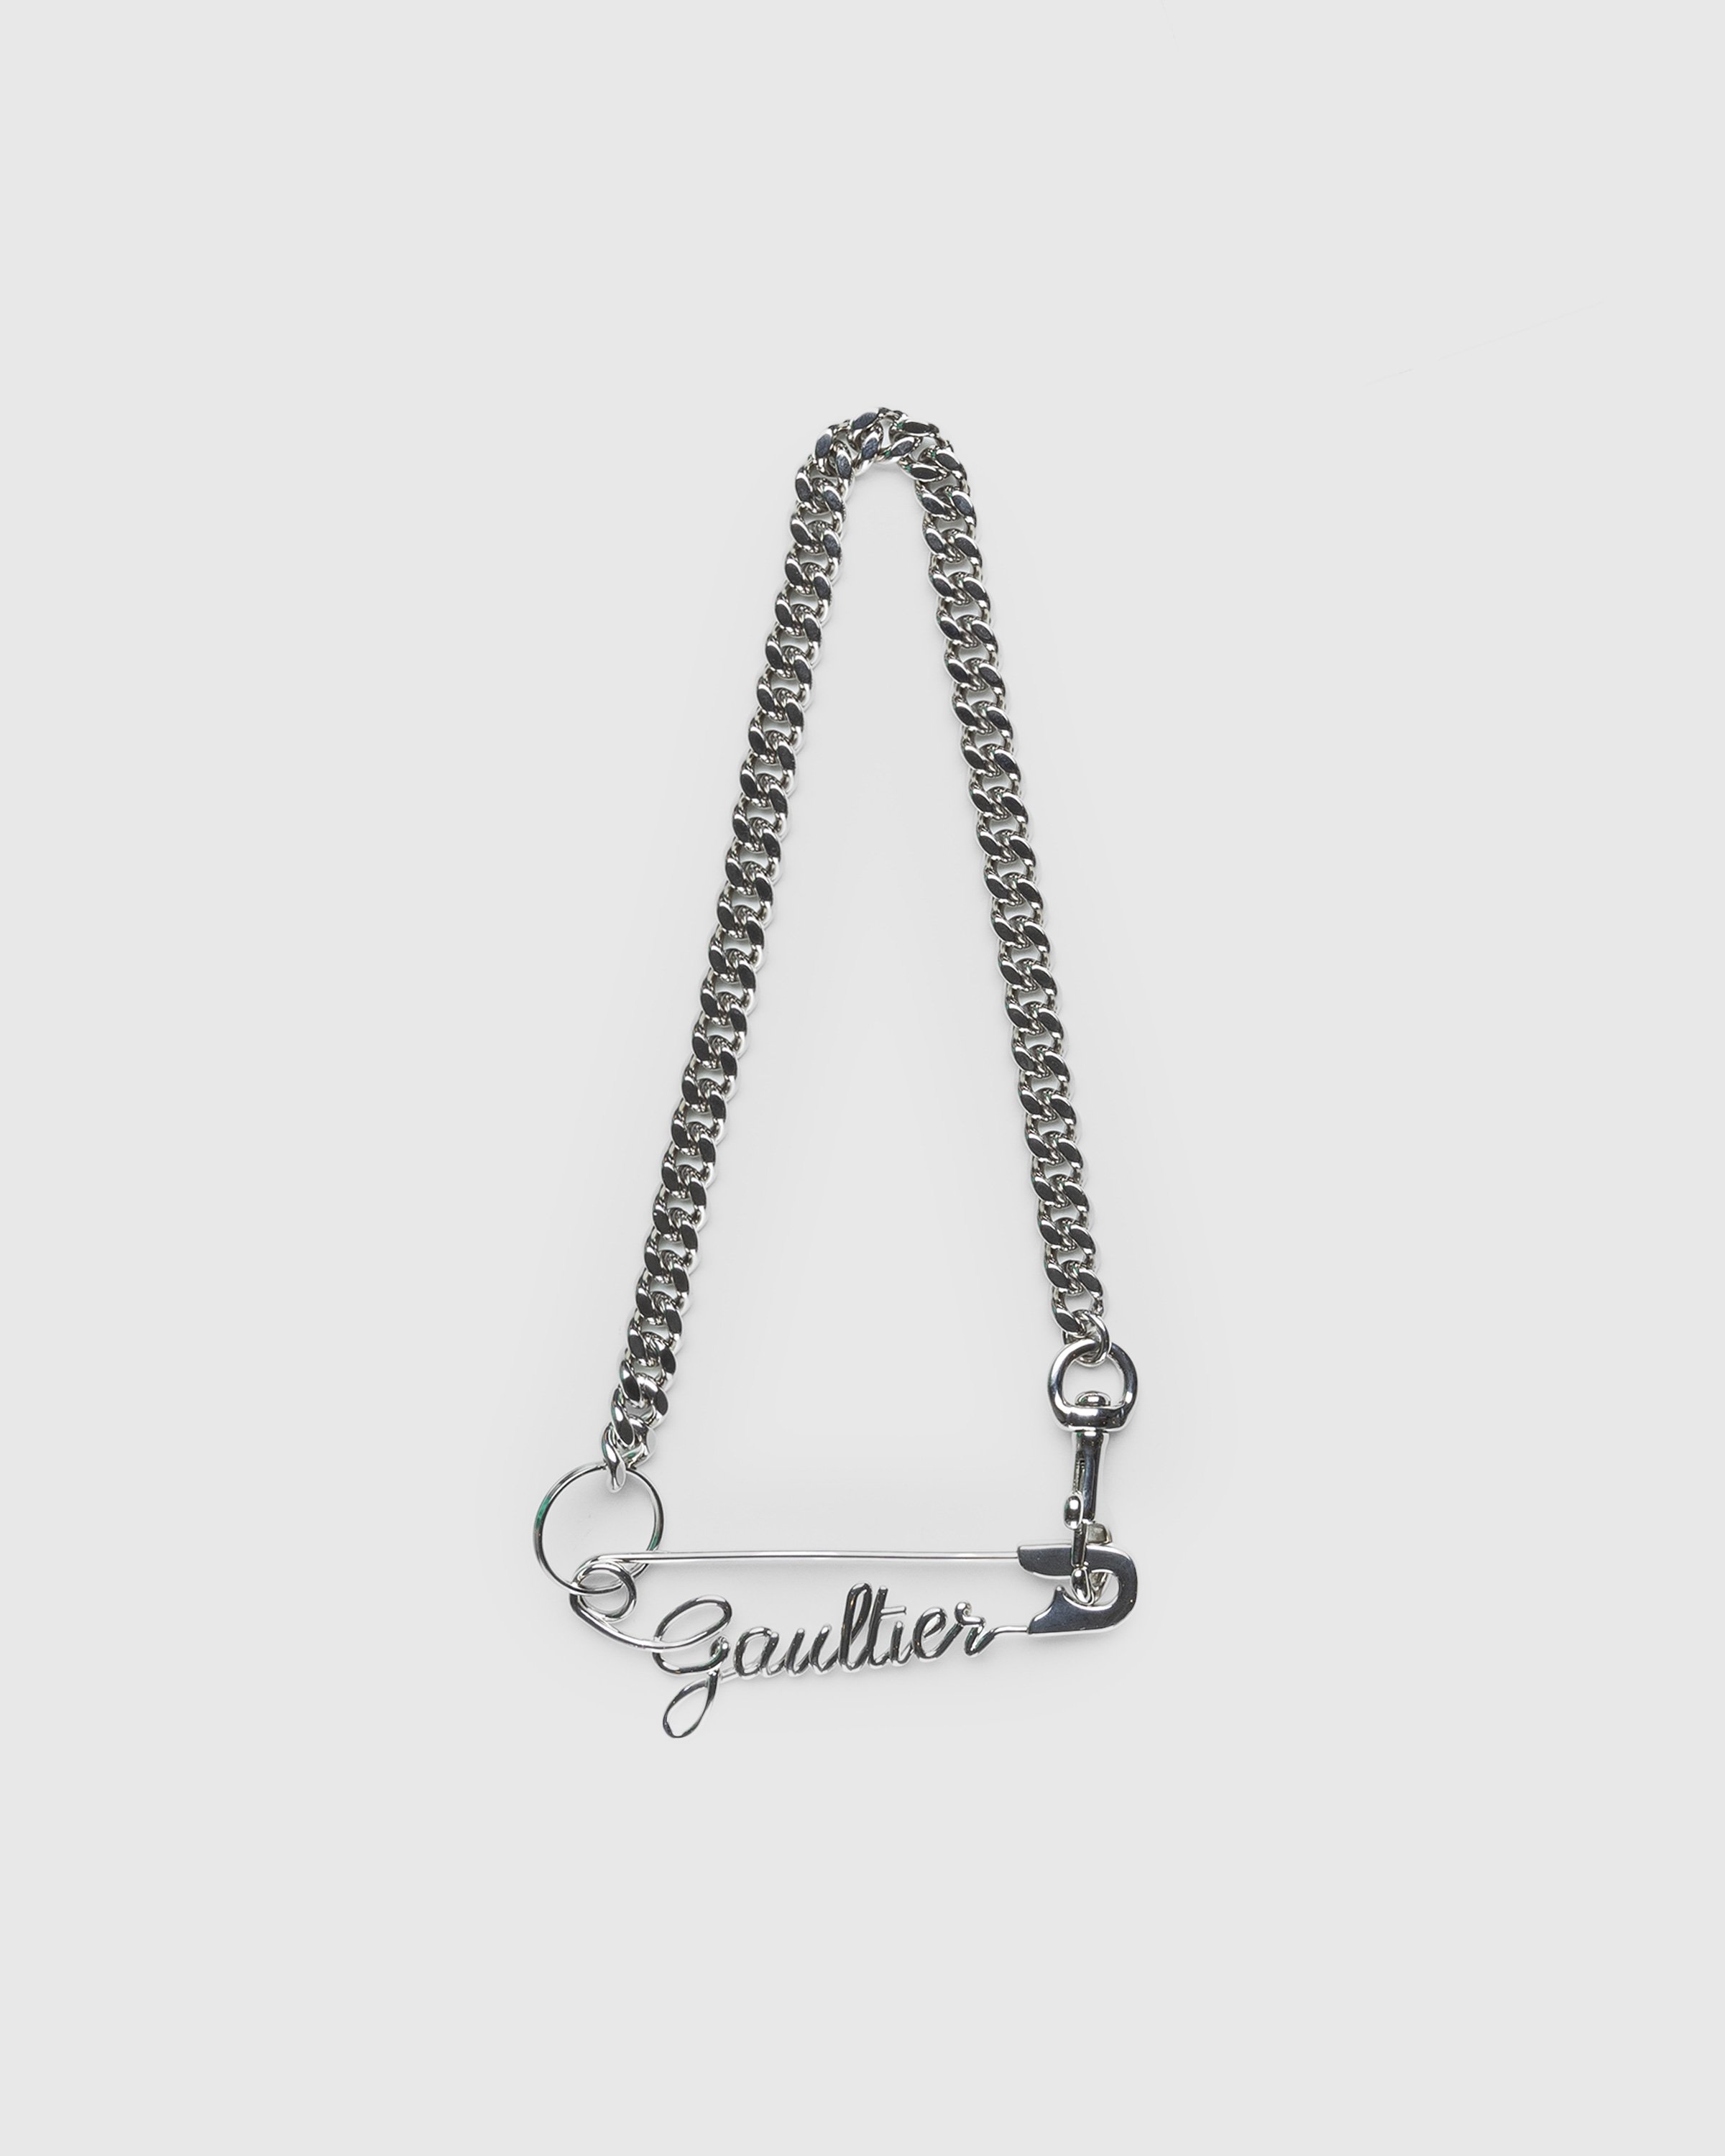 Jean Paul Gaultier – Safety Pin Gaultier Necklace Silver | Highsnobiety ...